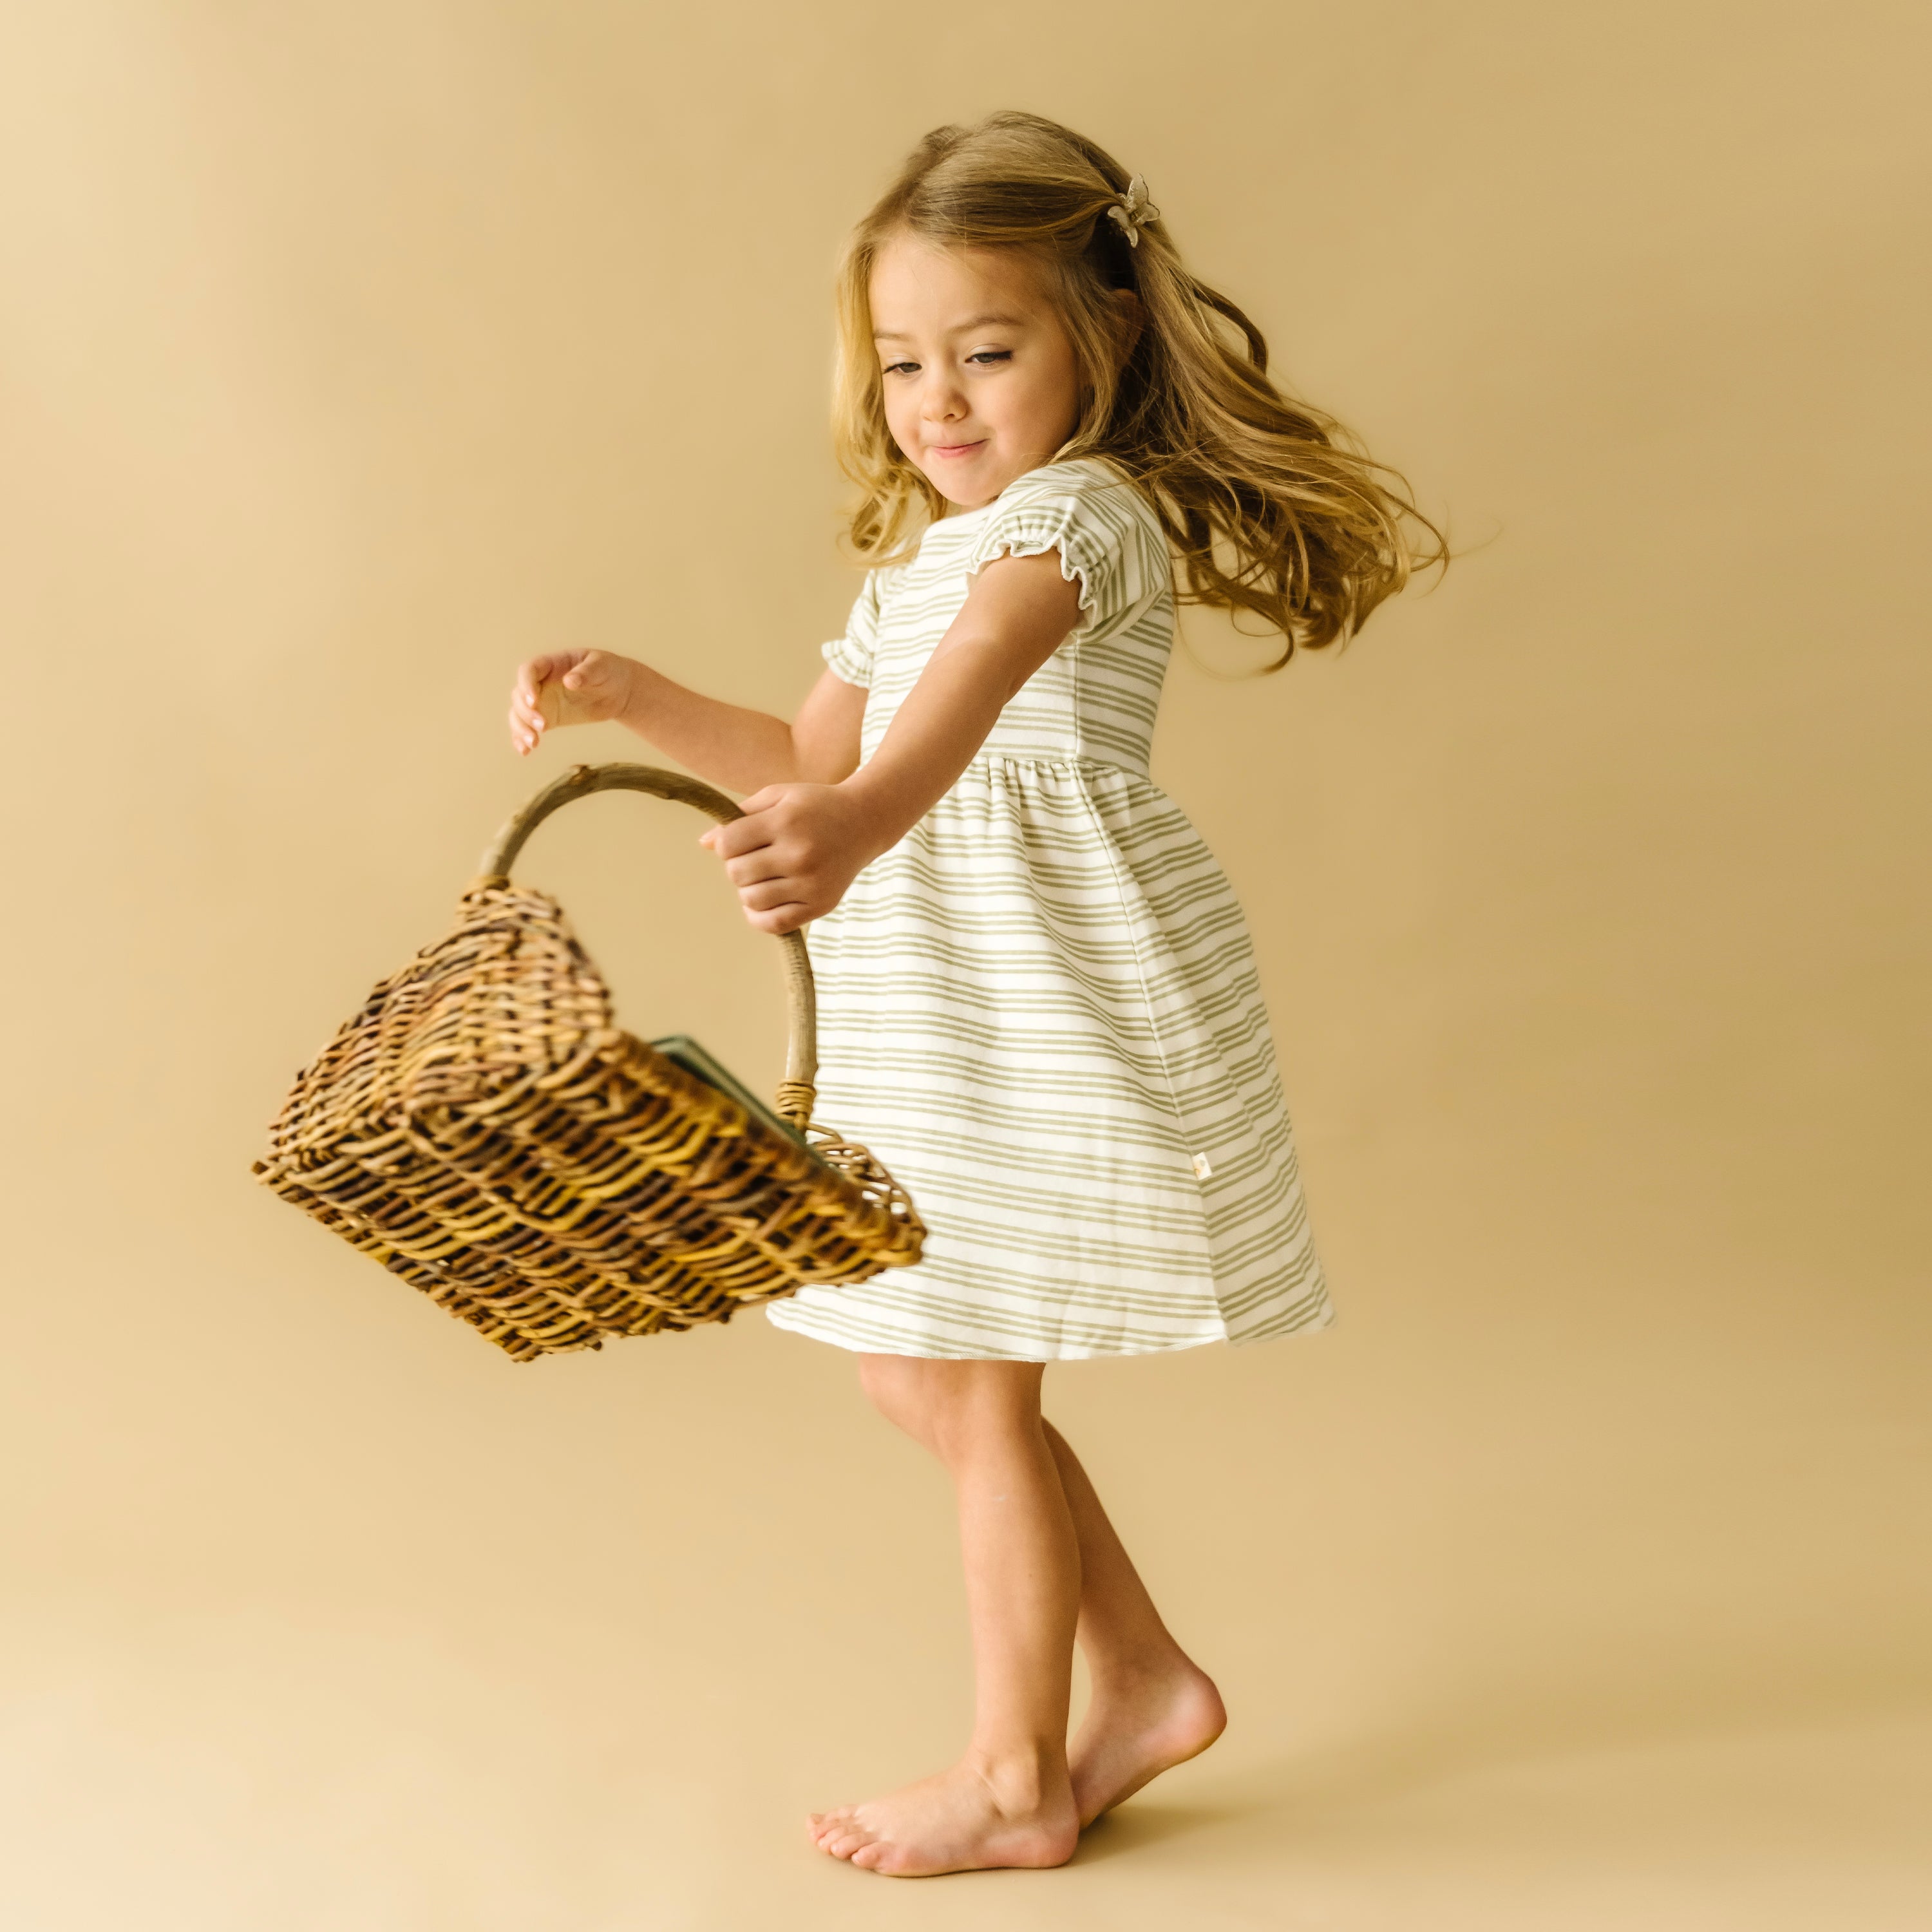 A young girl in an Organic Kids striped dress joyfully leaps while holding a large wicker basket, her bare feet just off the ground and her hair floating gently, against a soft